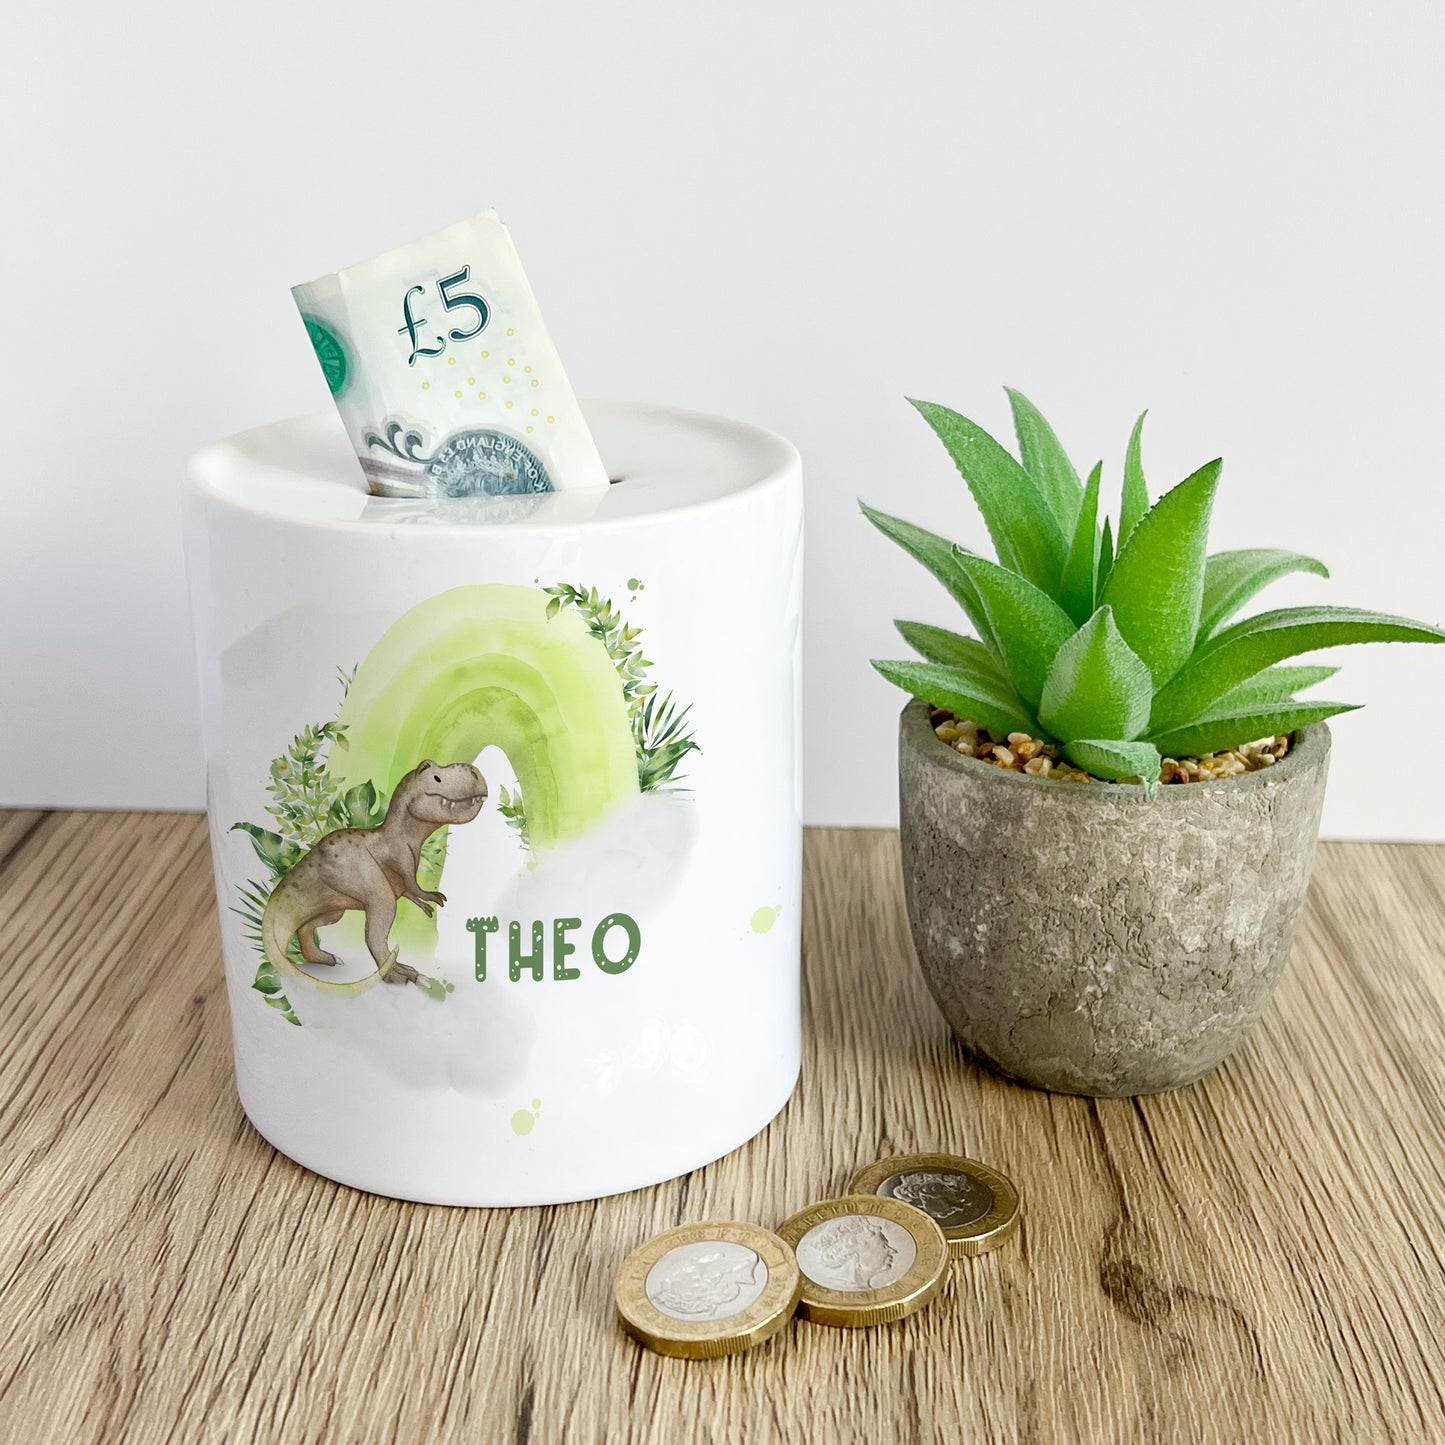 Personalised ceramic money box with a dinosaur and rainbow